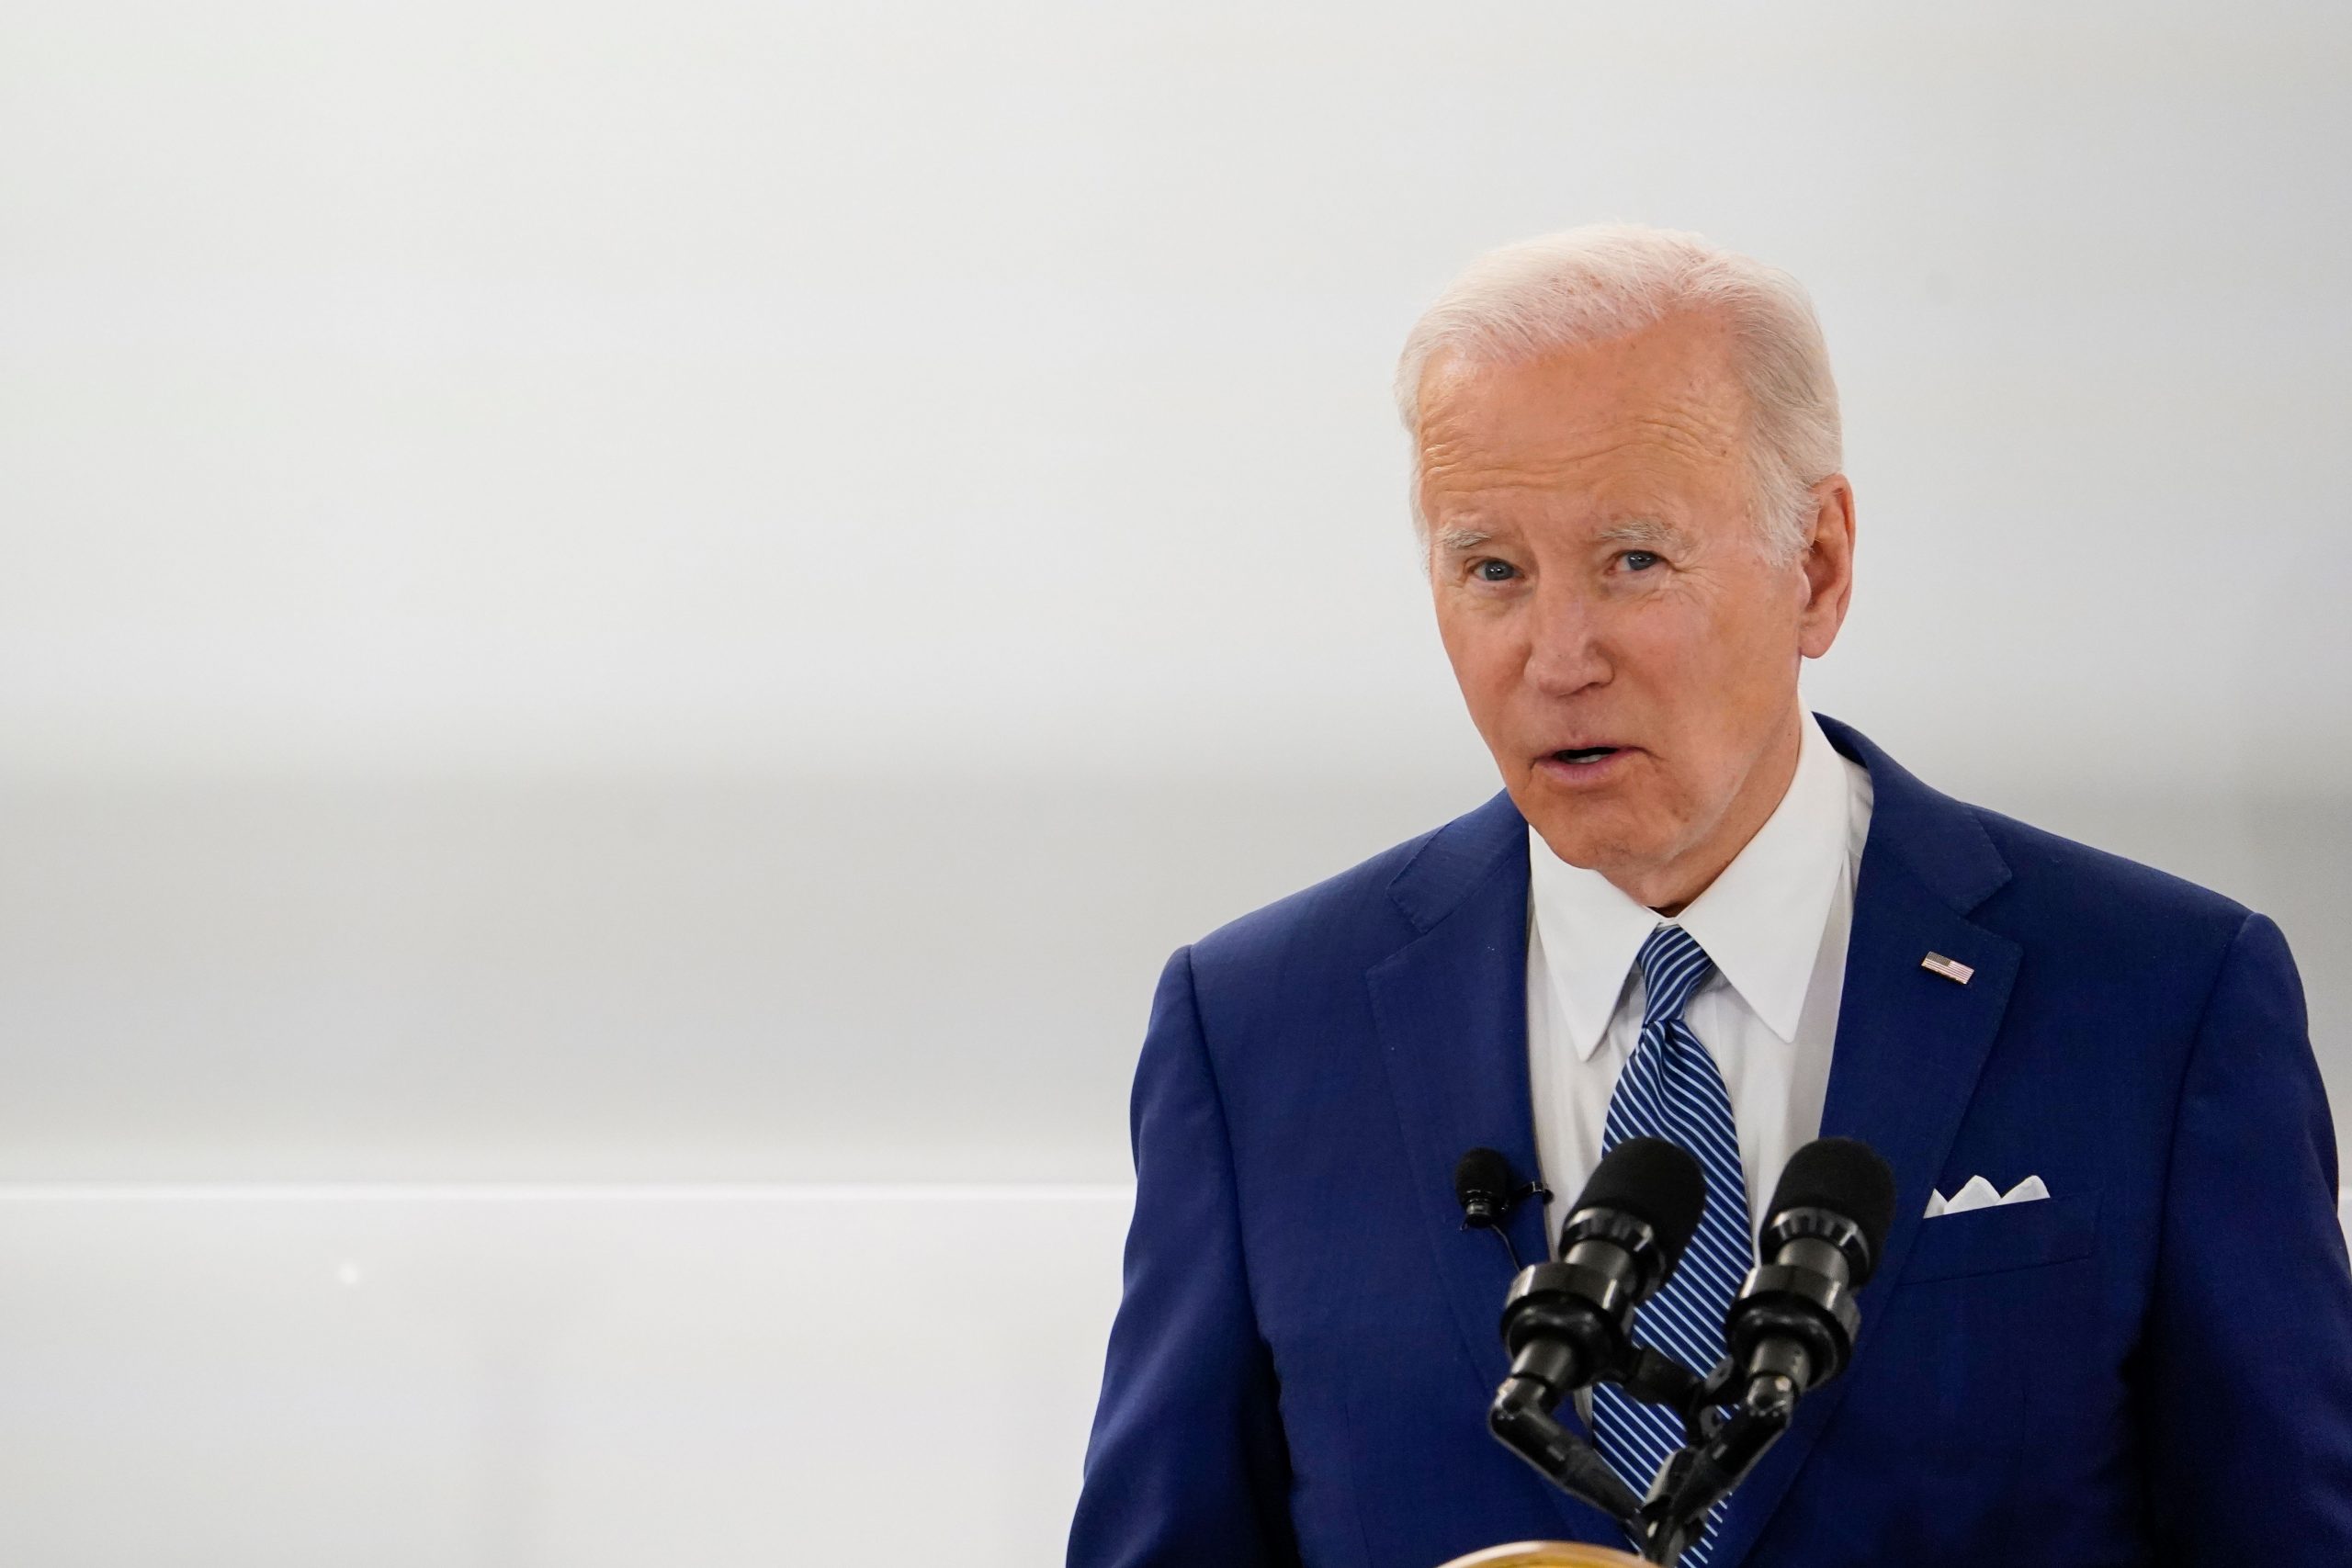 ‘No plans’ for Joe Biden visit to Ukraine at this point, White House confirms